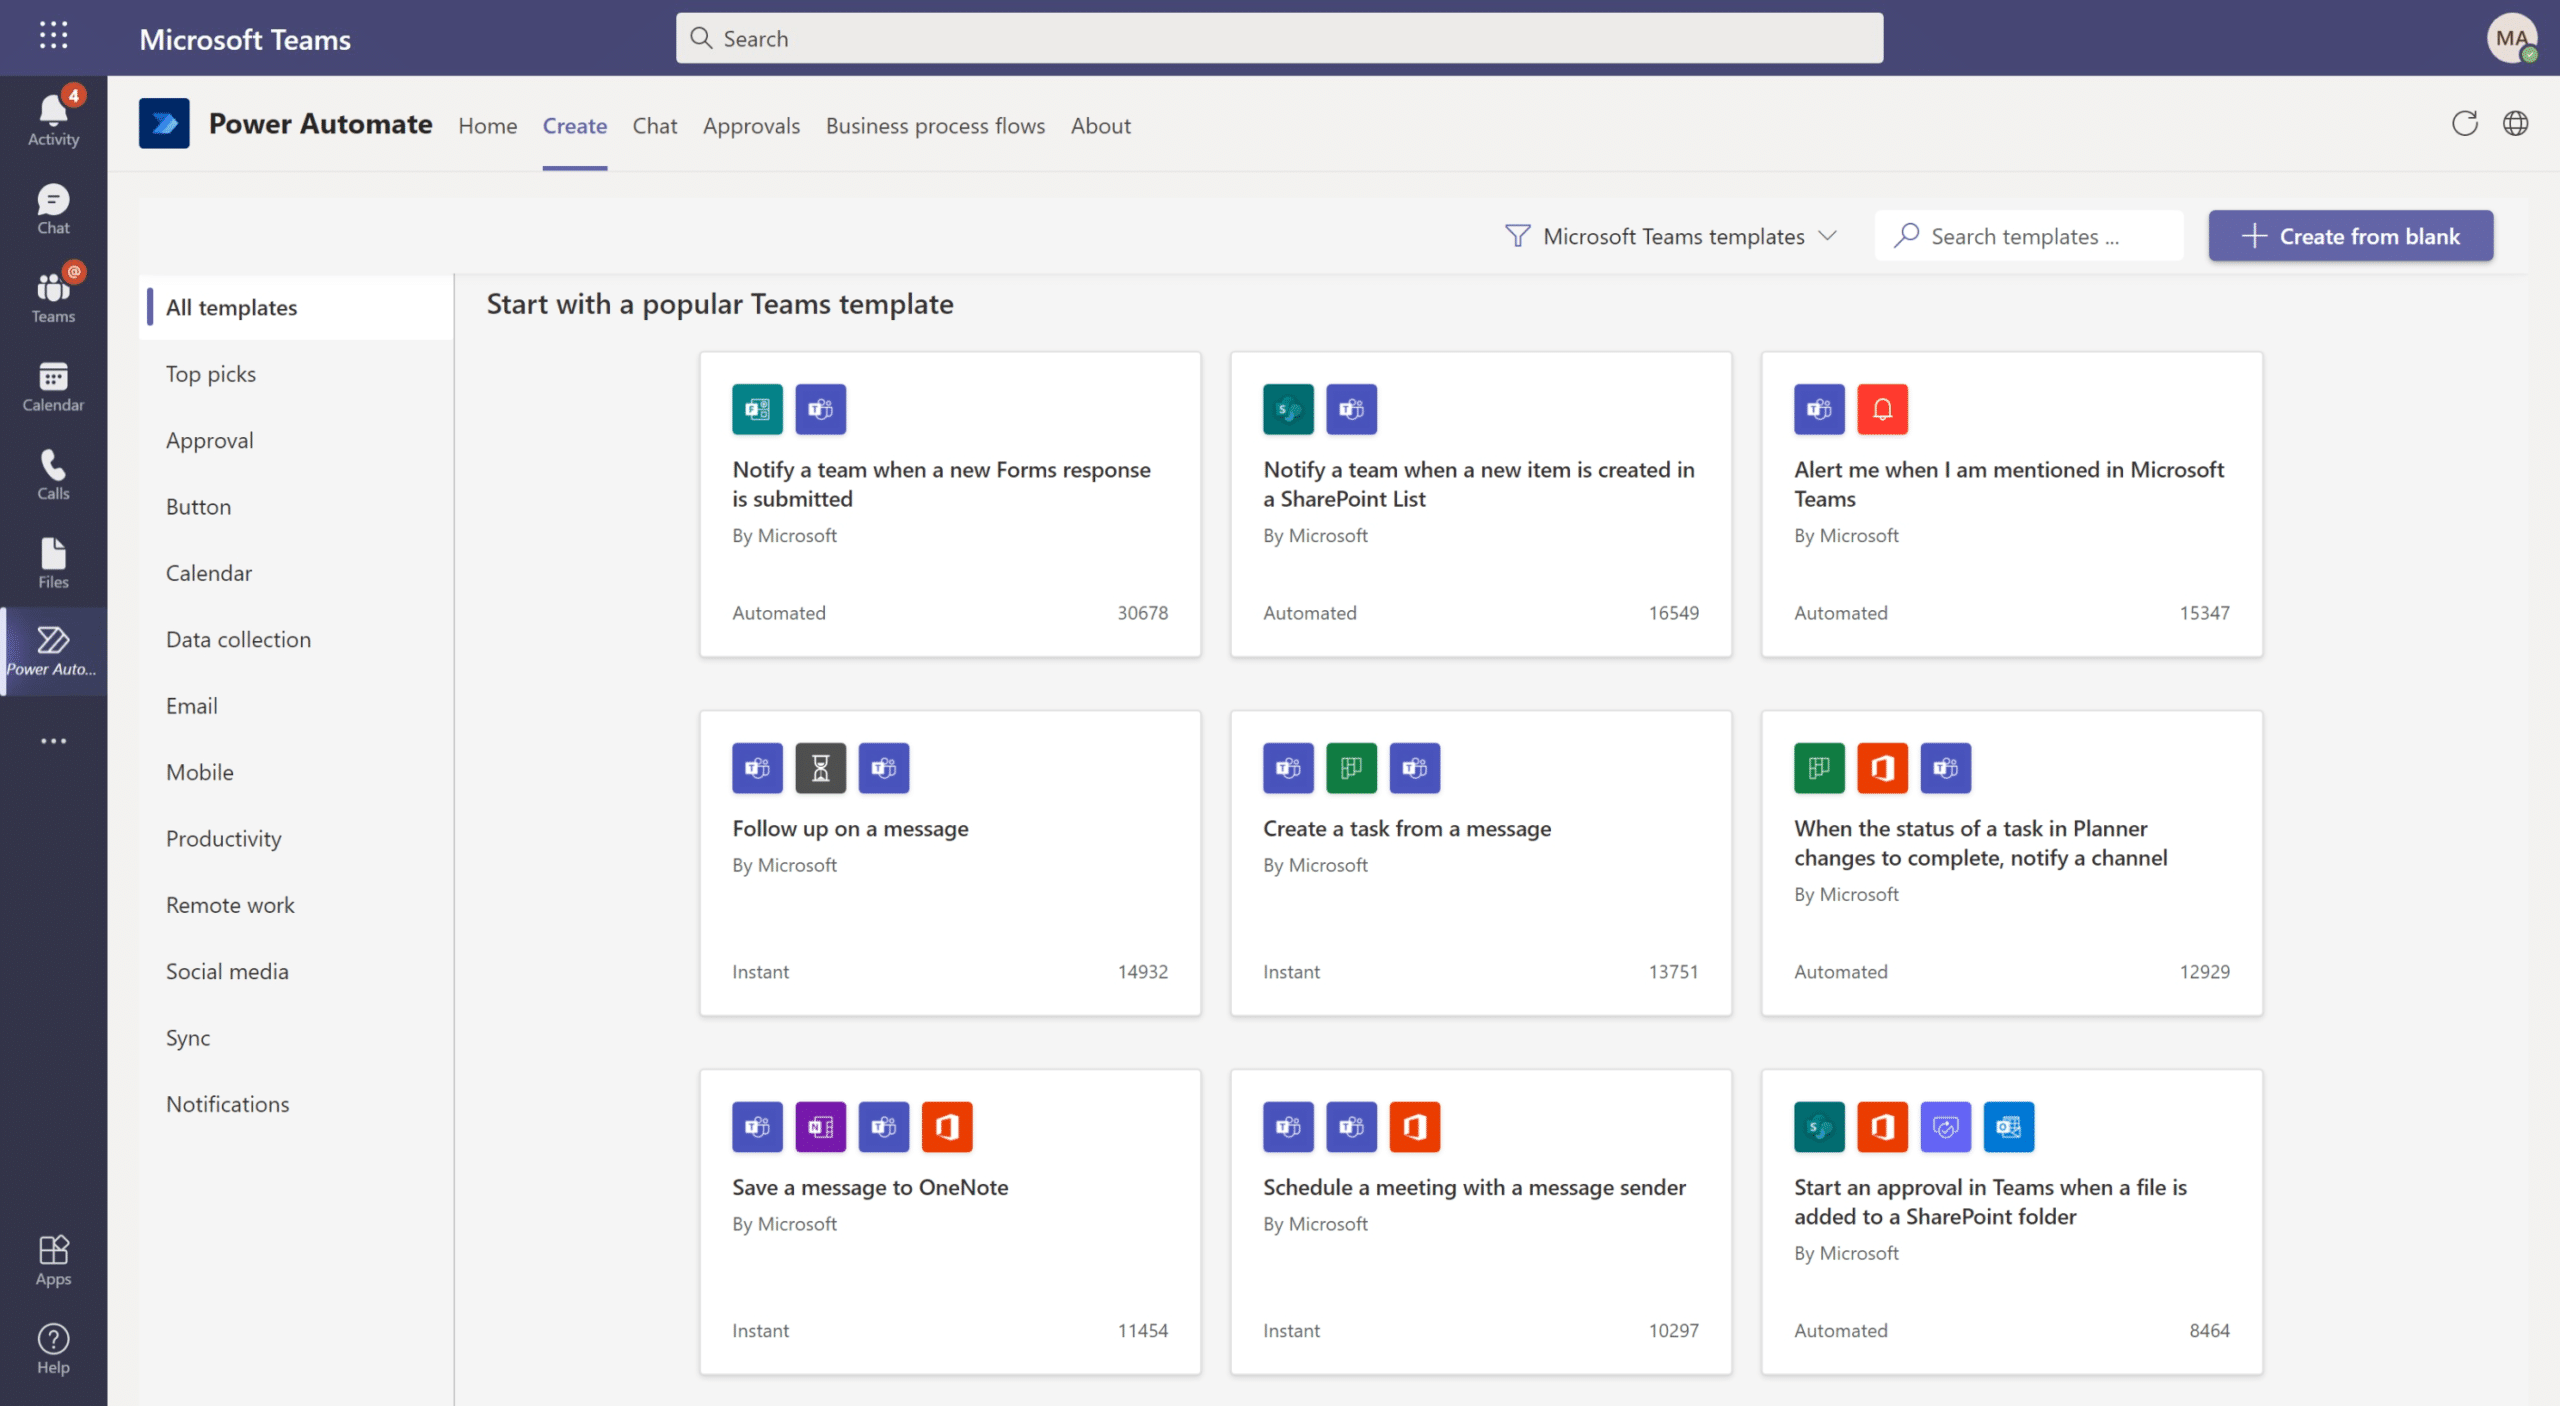 The Power Automate app in Microsoft Teams puts automation in the hub for teamwork. Create and manage cloud flows and business process flows without leaving Teams, using a variety of pre-built templates or starting from scratch.